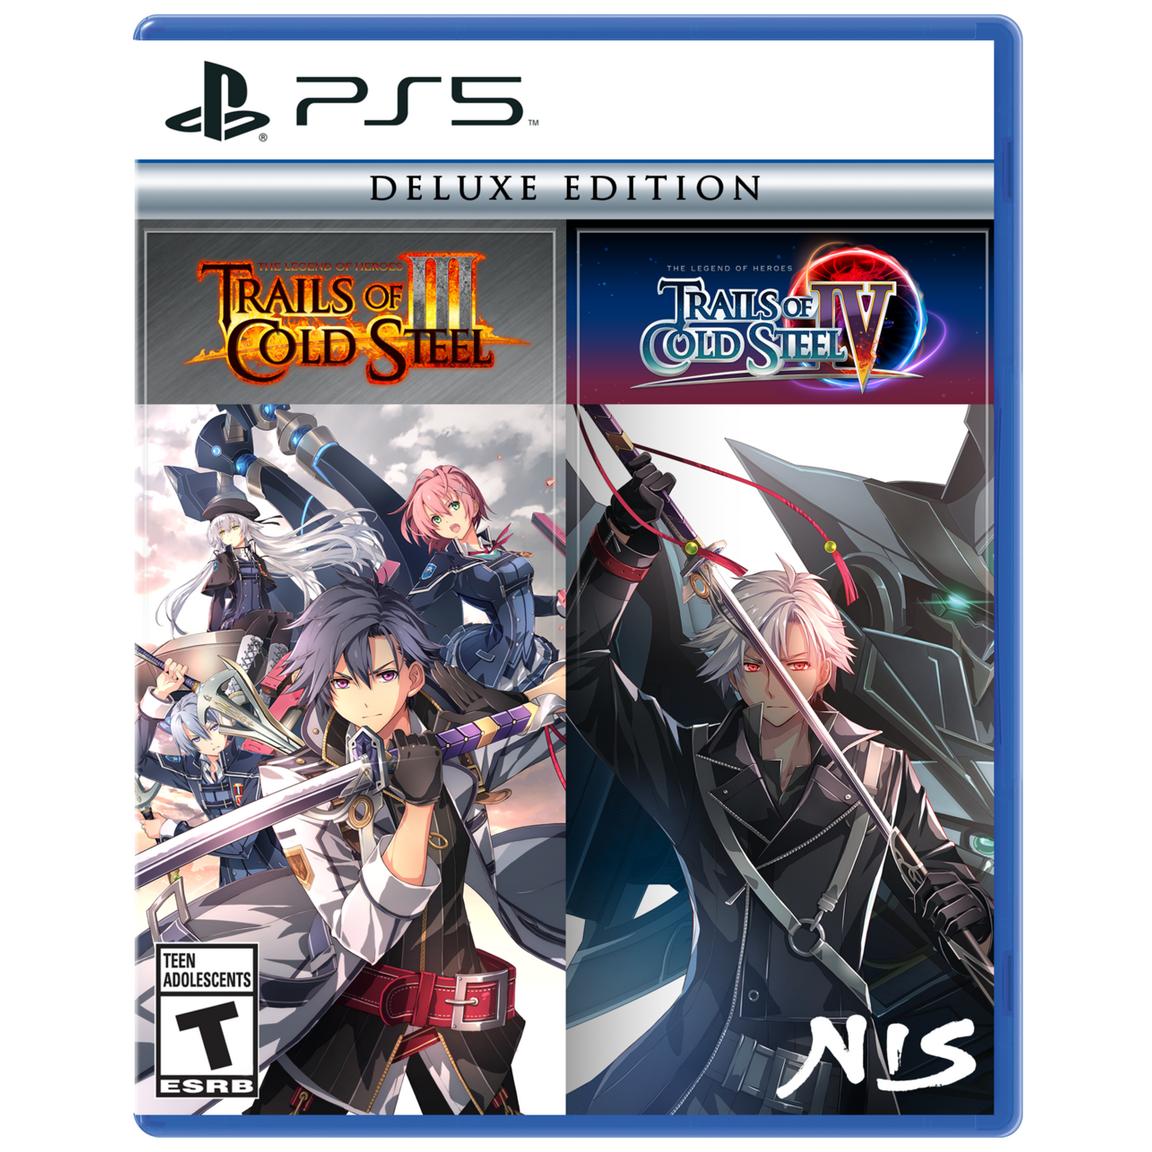 Видеоигра The Legend of Heroes: Trails of Cold Steel III / The Legend of Heroes: Trails of Cold Steel IV - Deluxe Edition - PlayStation 5 the legend of heroes trails of cold steel 4 iv frontline edition switch английский язык